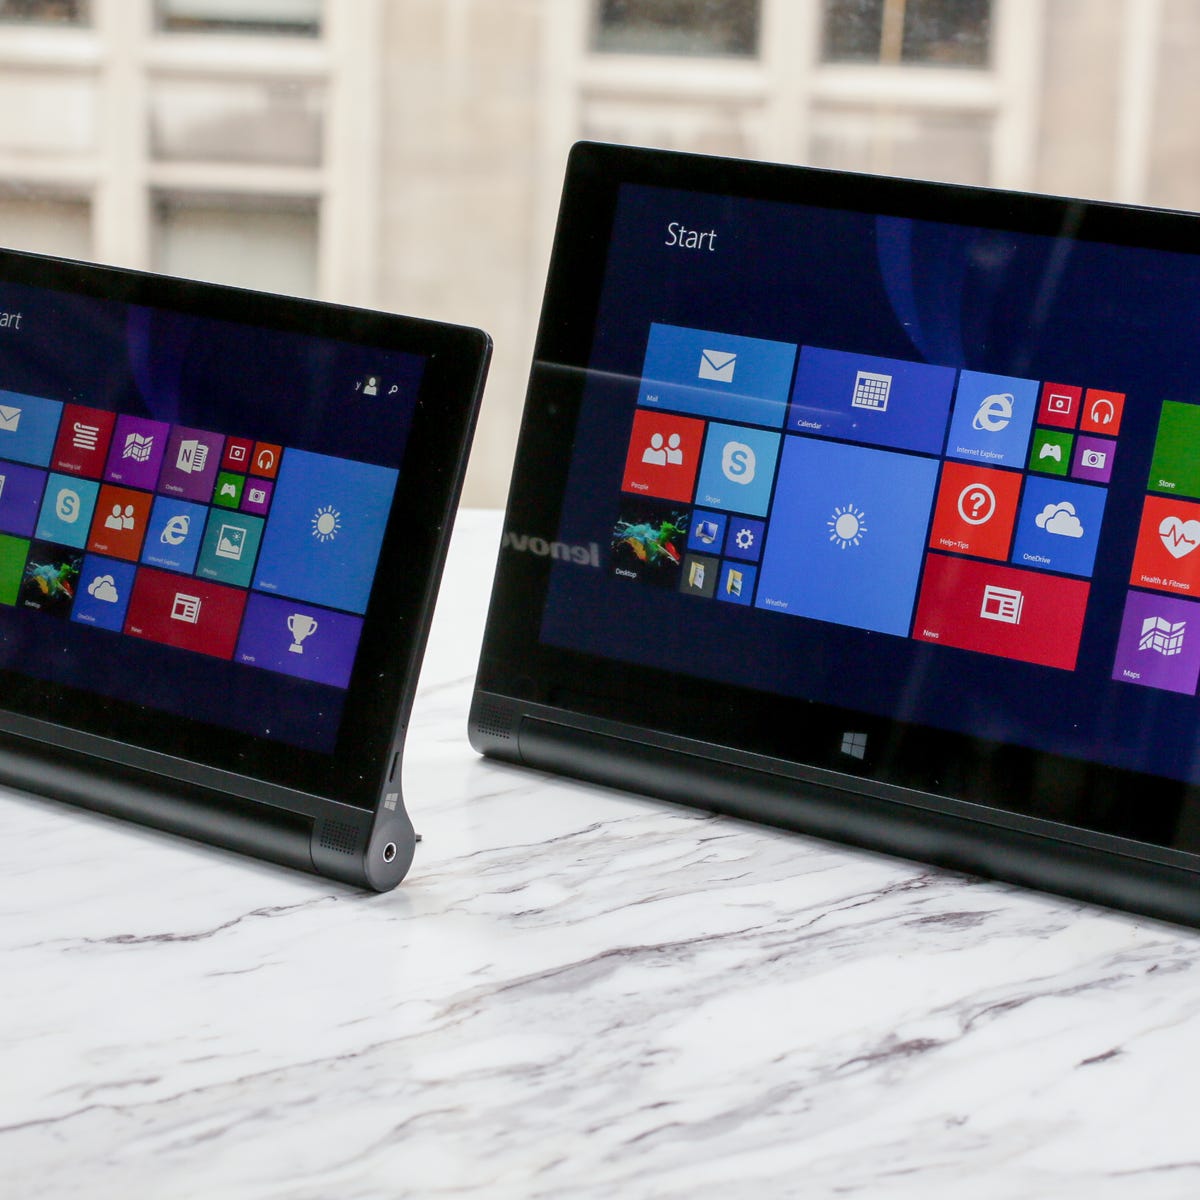 Lenovo Yoga Tablet 2 series review: Lenovo's new Yoga Tablet 2 line covers  Windows, Android in two sizes (hands-on) - CNET